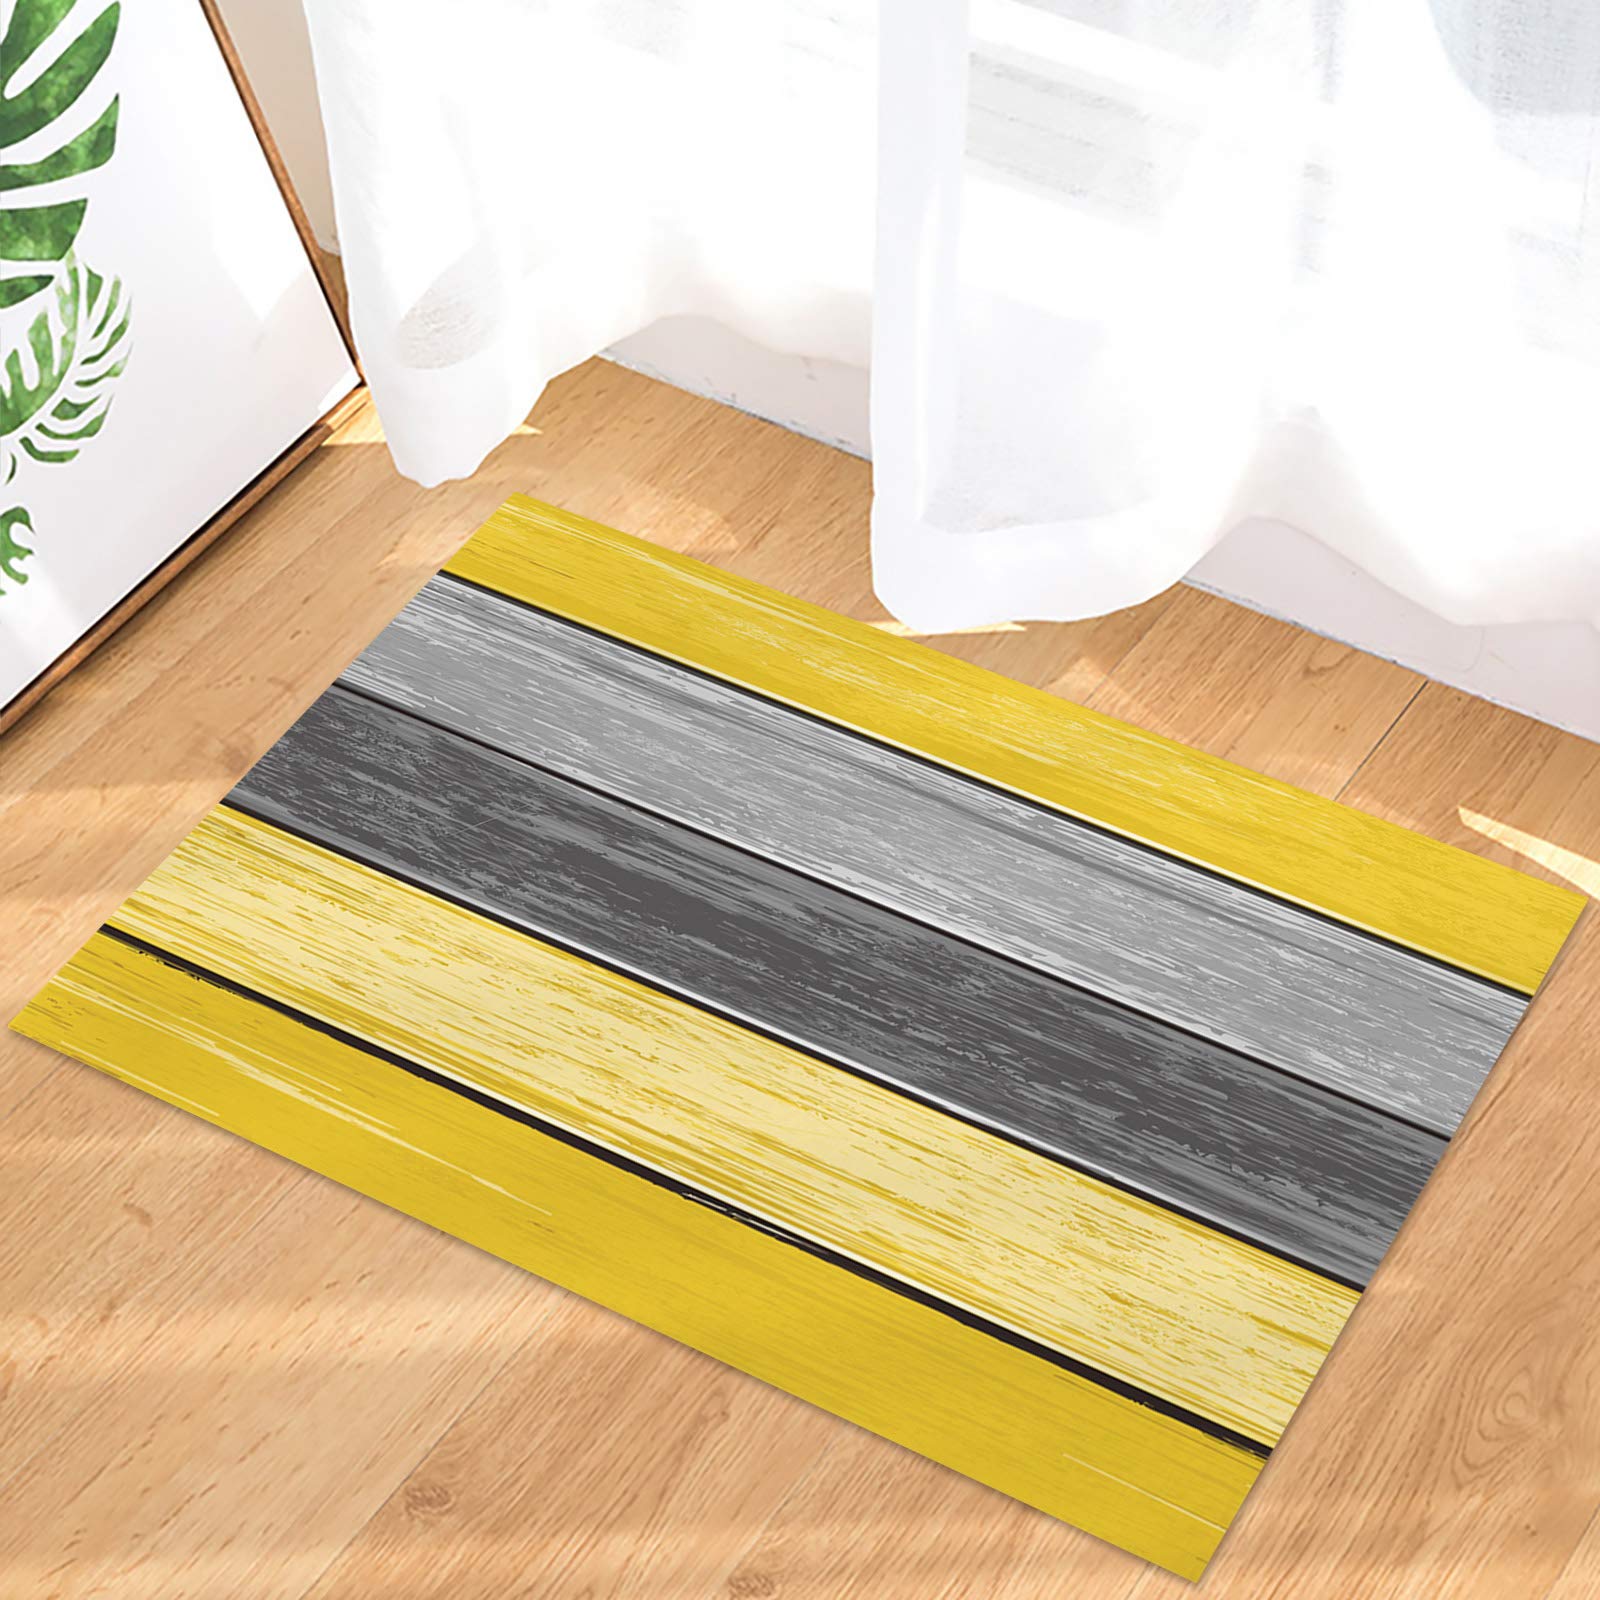 Door Mat for Bedroom Decor, Vintage Rustic Old Wooden Board Yellow Gray Floor Mats, Holiday Rugs for Living Room, Absorbent Non-Slip Bathroom Rugs Home Decor Kitchen Mat Area Rug 18x30 Inch